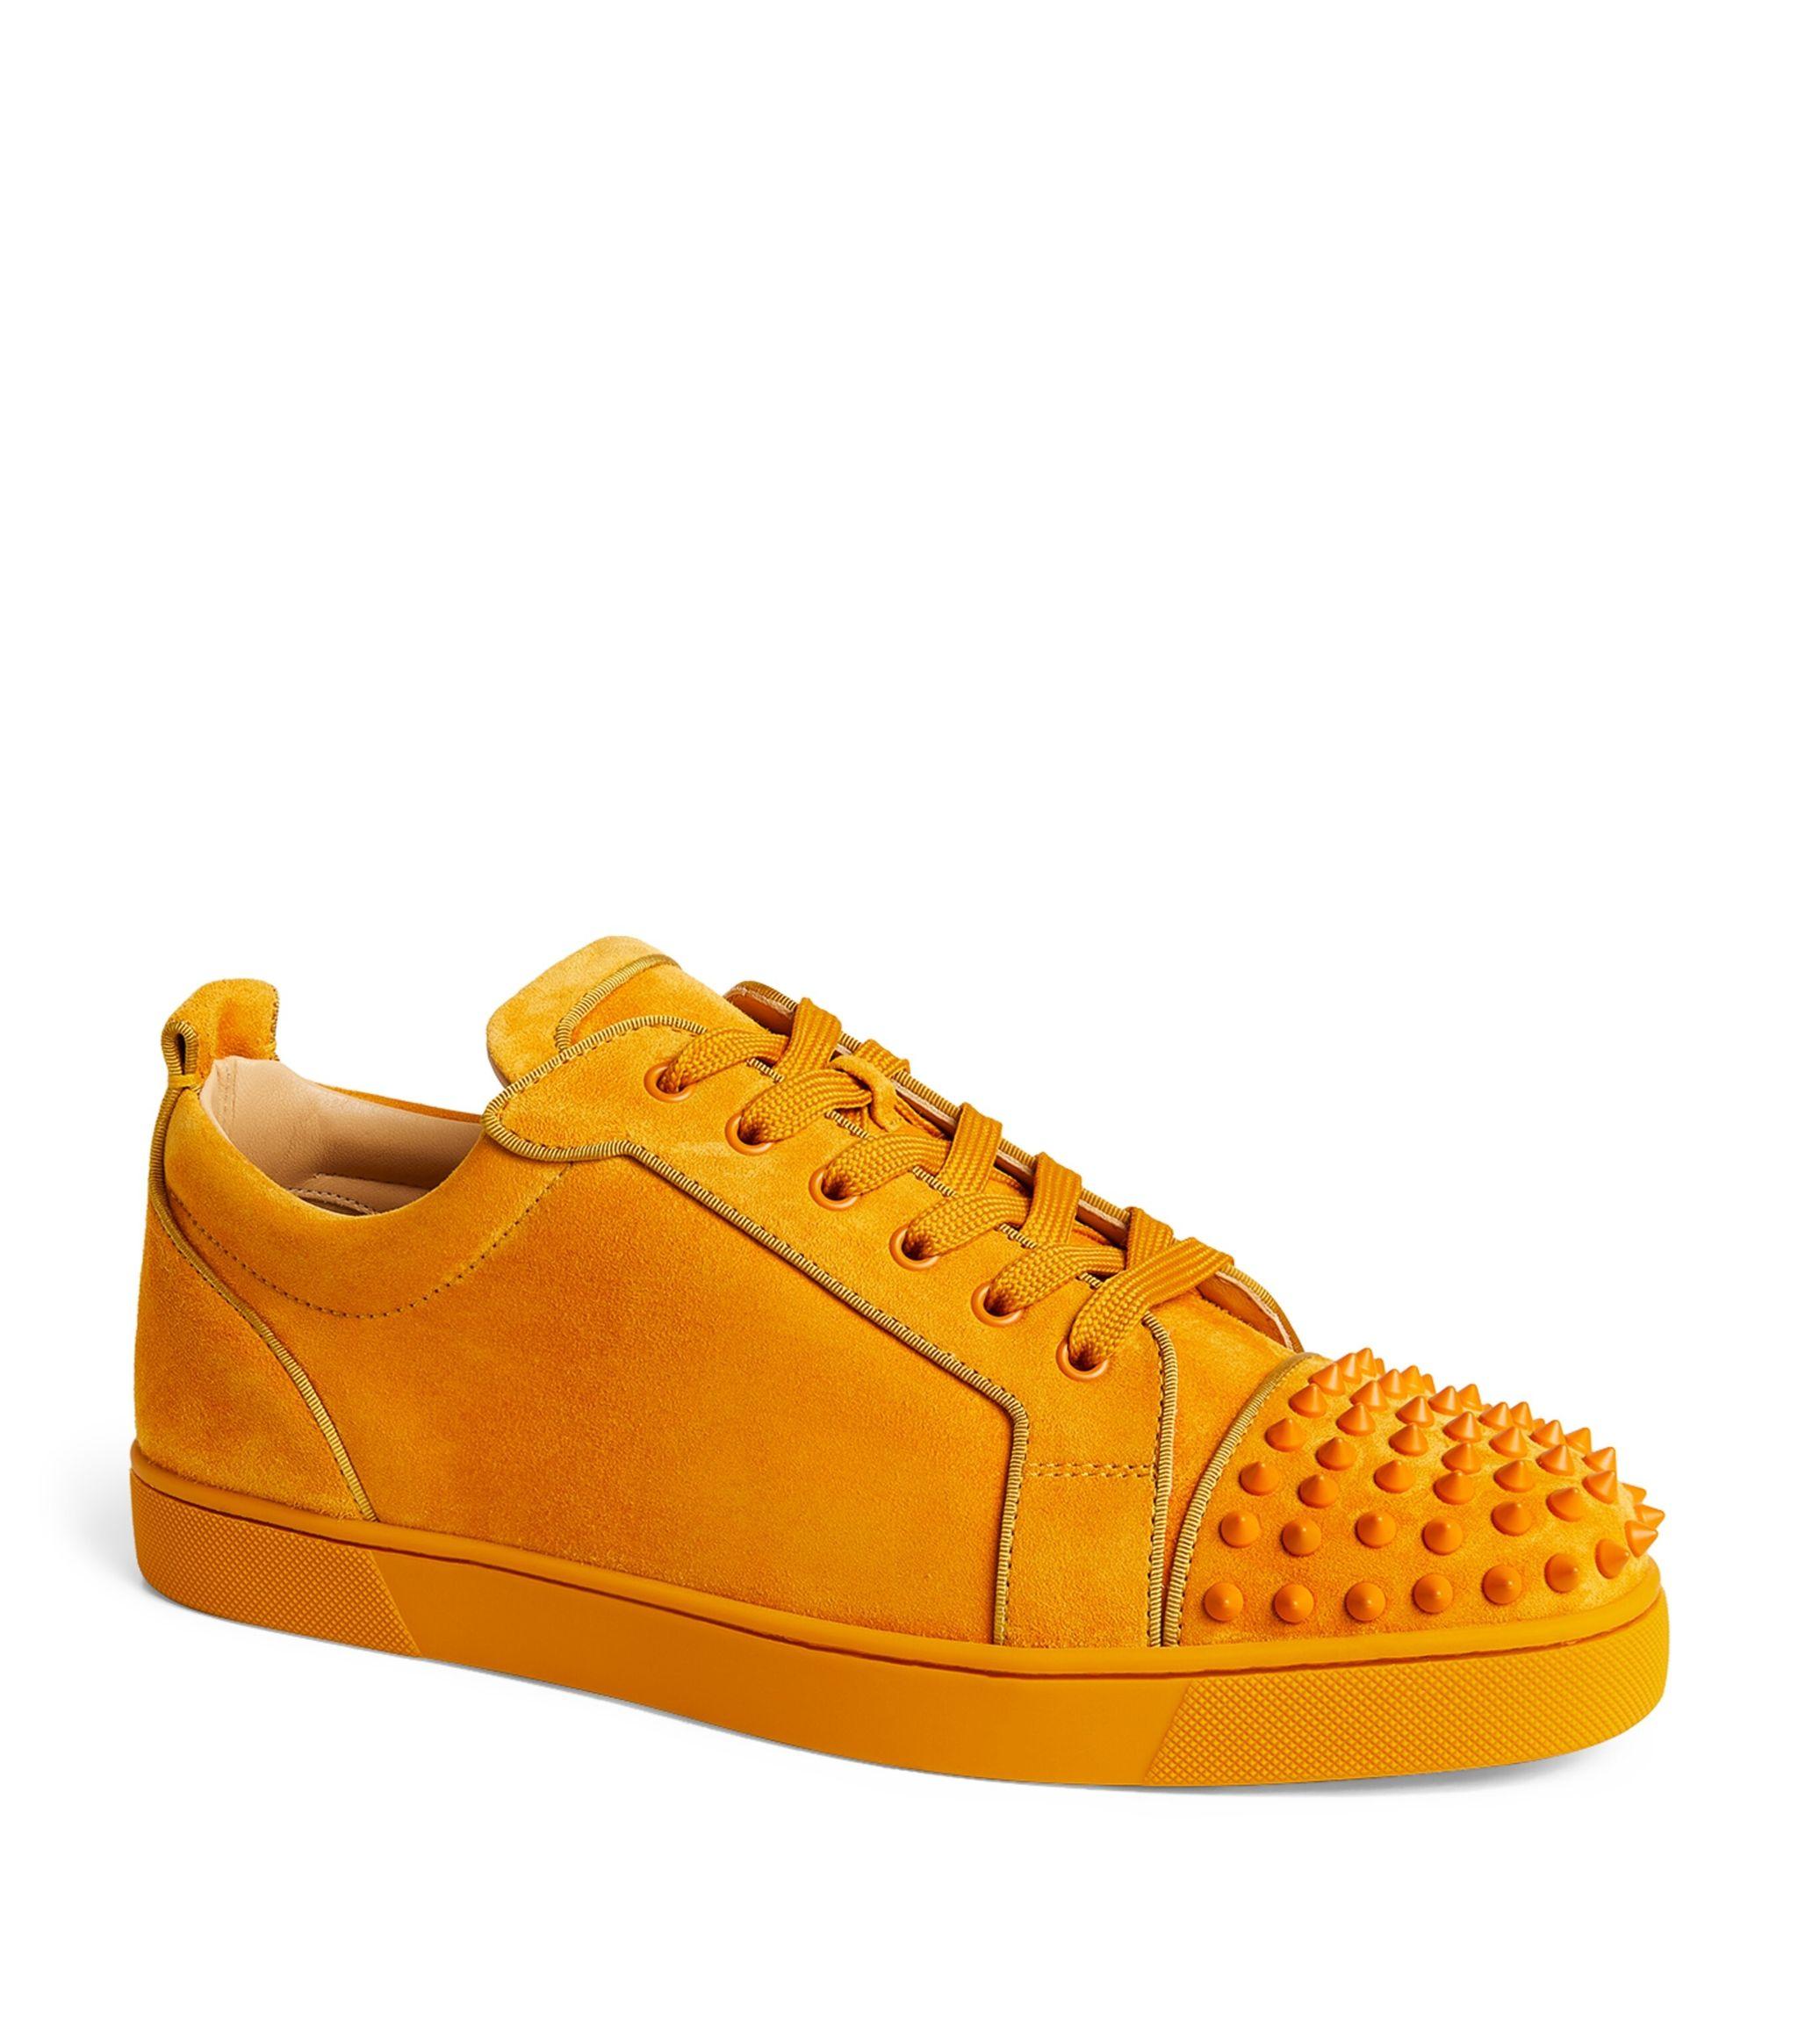 Louis Vuitton, Shoes, Christian Louboutin Junior Spikes Red Sole Sneakers